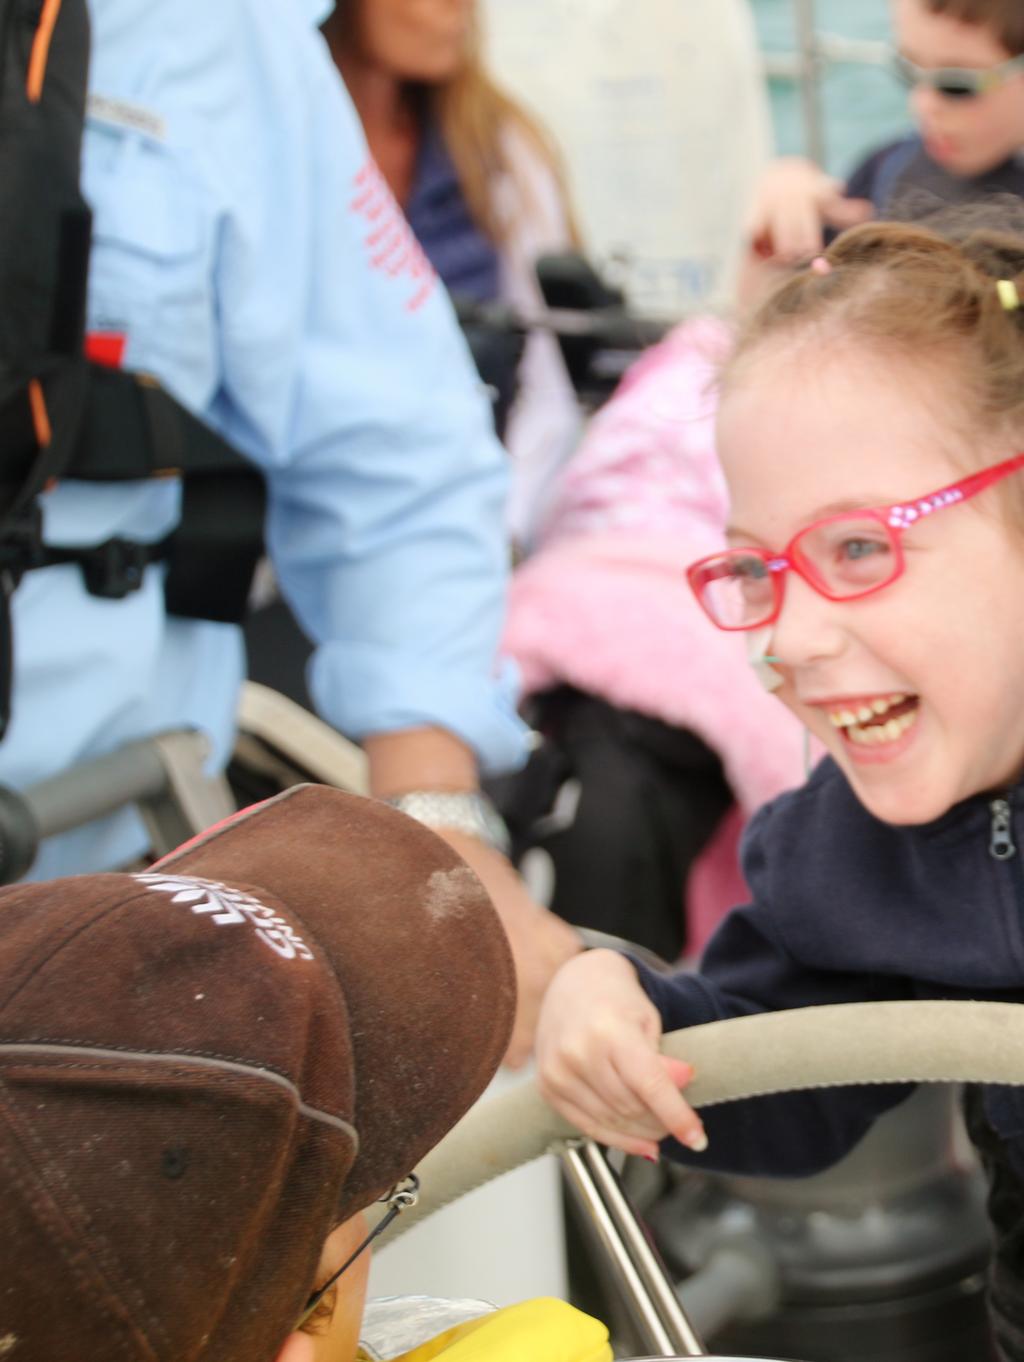 About Sailors WITH DISABILITIES Since 1994, over 42,000 children and adults have benefitted from programs run by Sailors with disabilities (SWD).